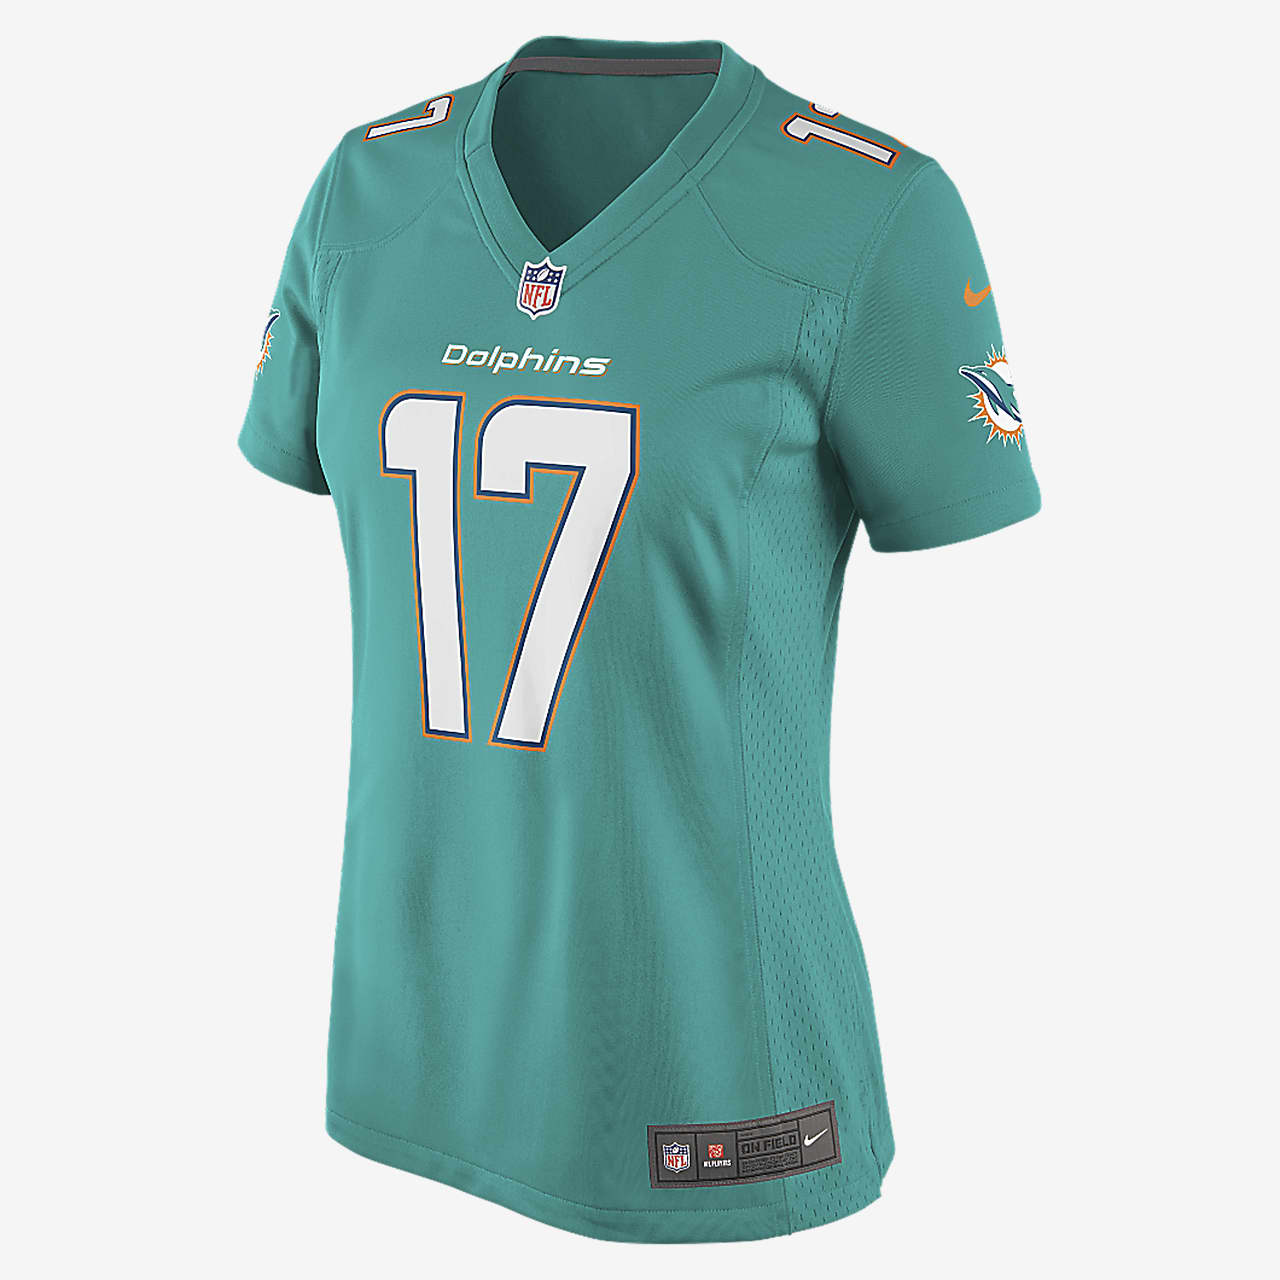 NFL Miami Dolphins (Ryan Tannehill) Women's American Football Home Game Jersey